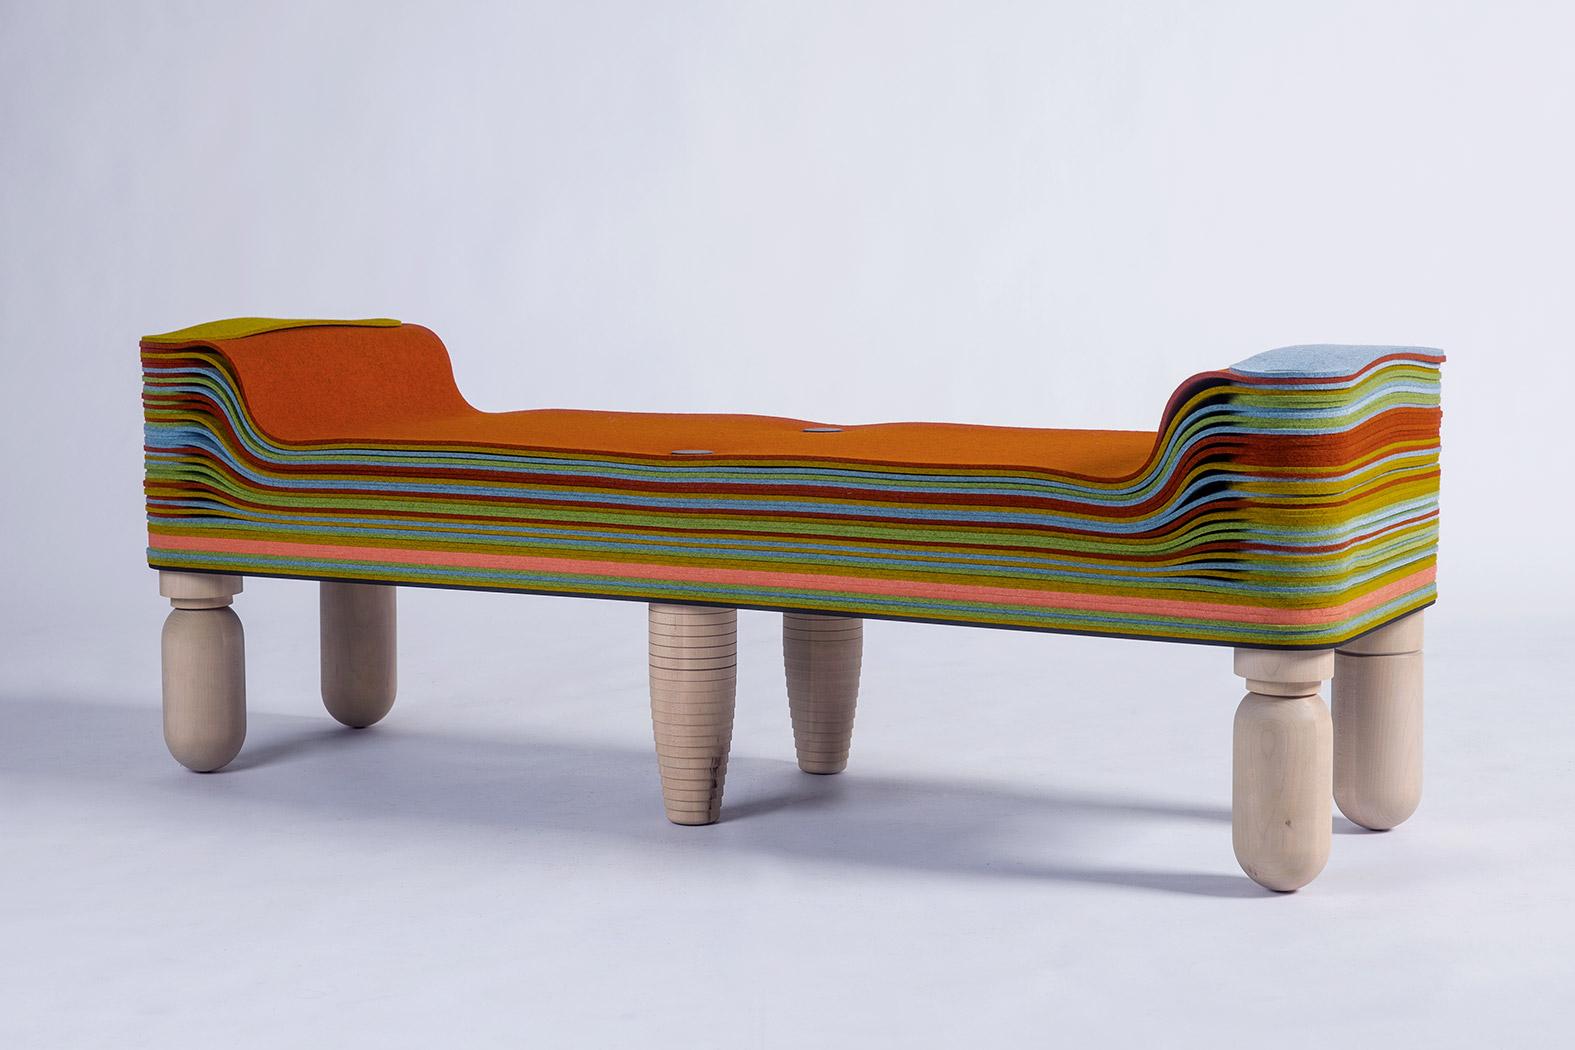 Maxine, Felt and Wood Bench, Benoist F. Drut in Stackabl, Canada, 2021 For Sale 1